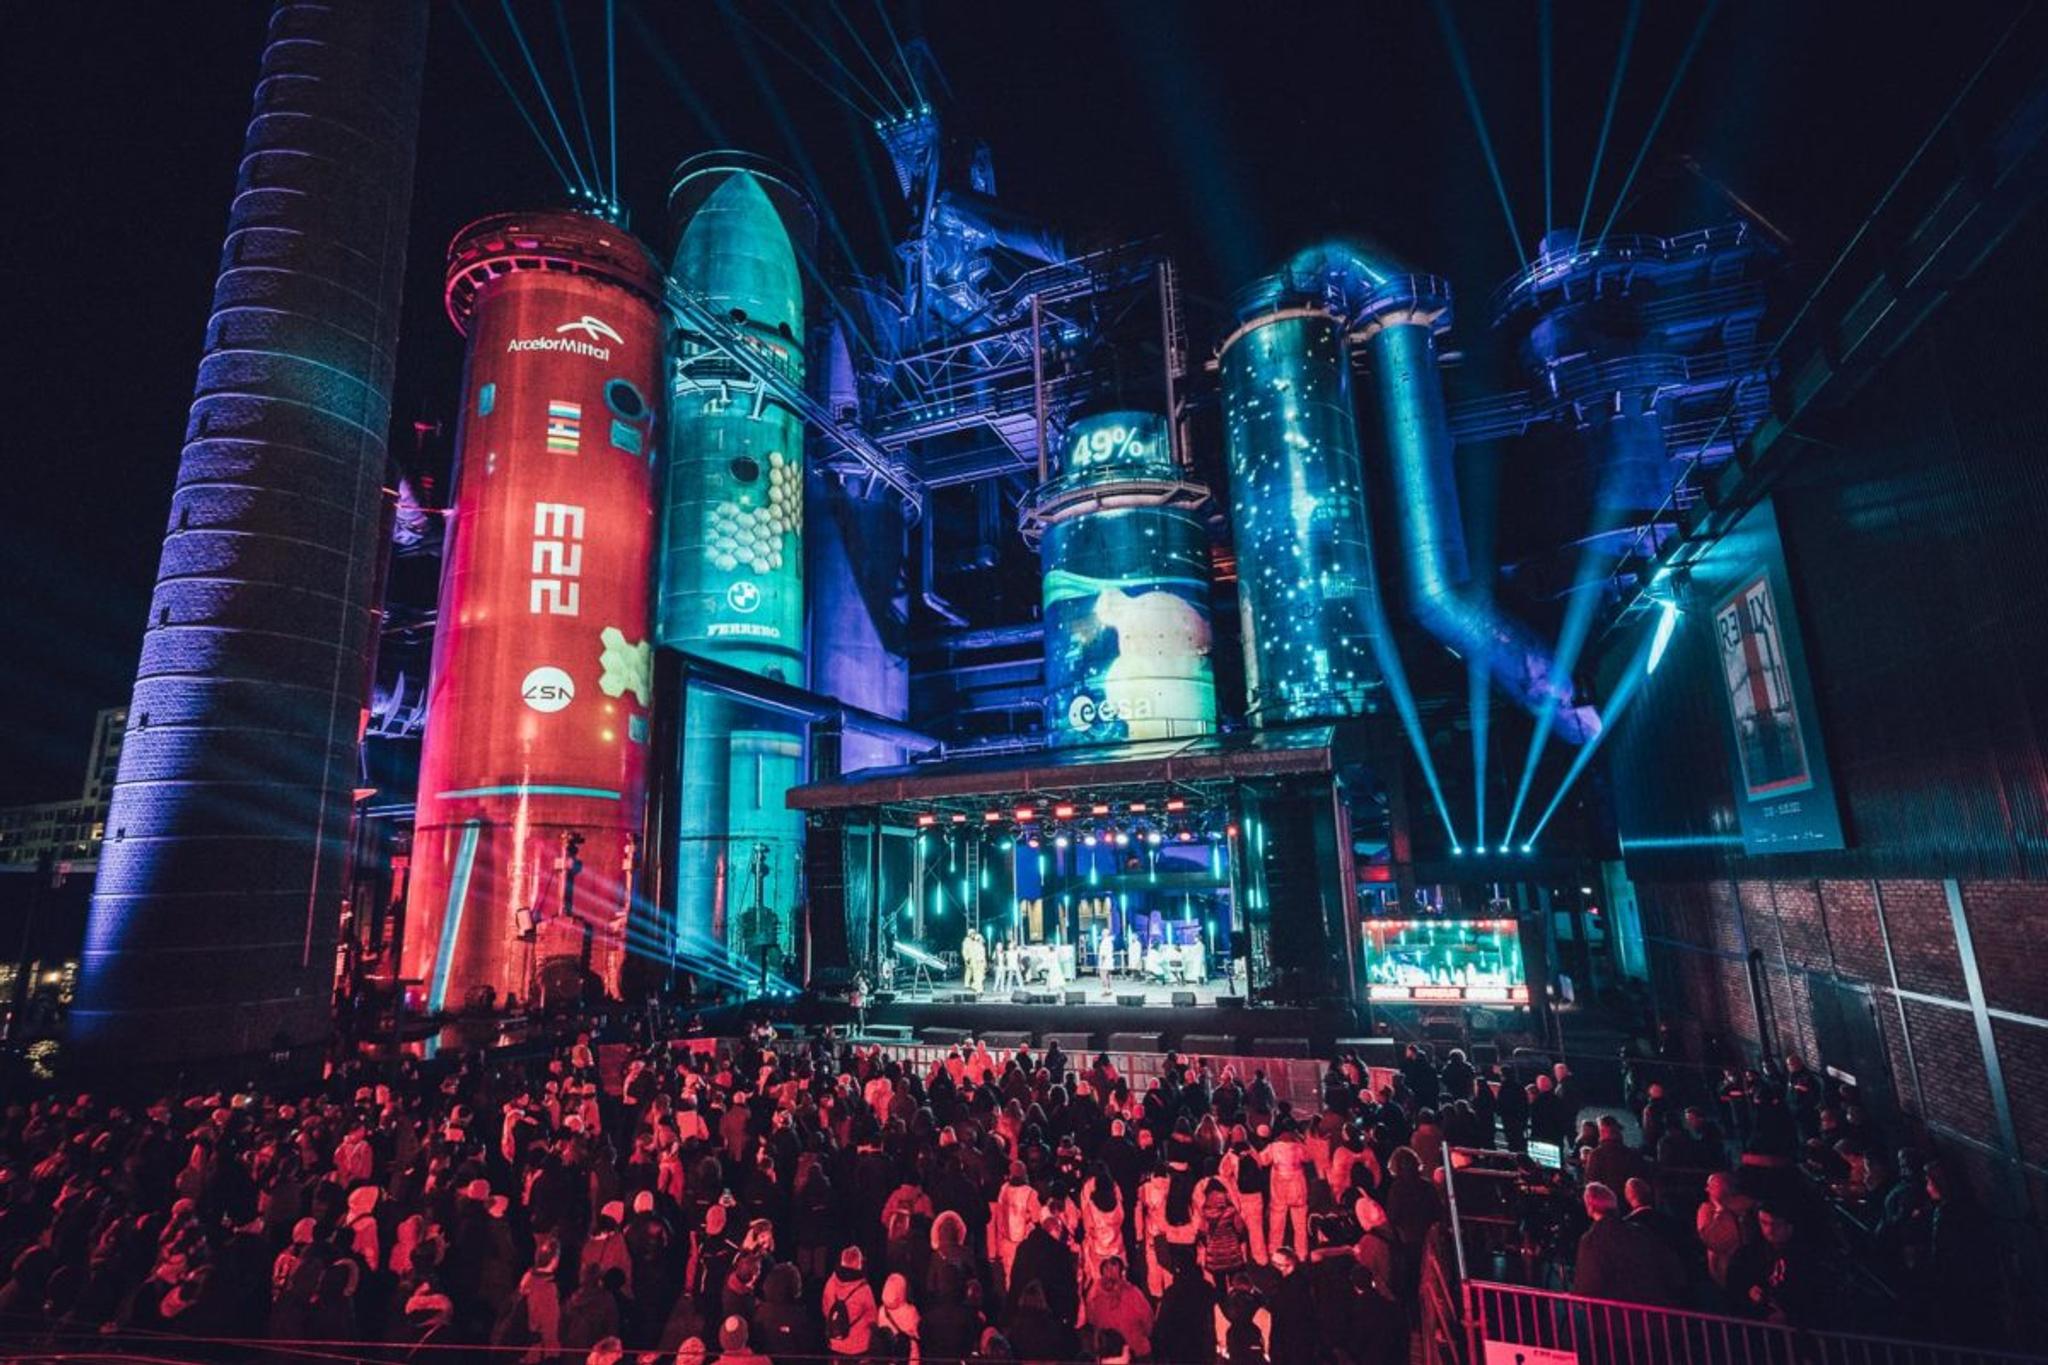 A wide shot of a crowd facing an outdoor stage. Blue lights are beaming out into the night sky, and industrial brick tube-towers and machinery frames the stage and has video content projected onto them.